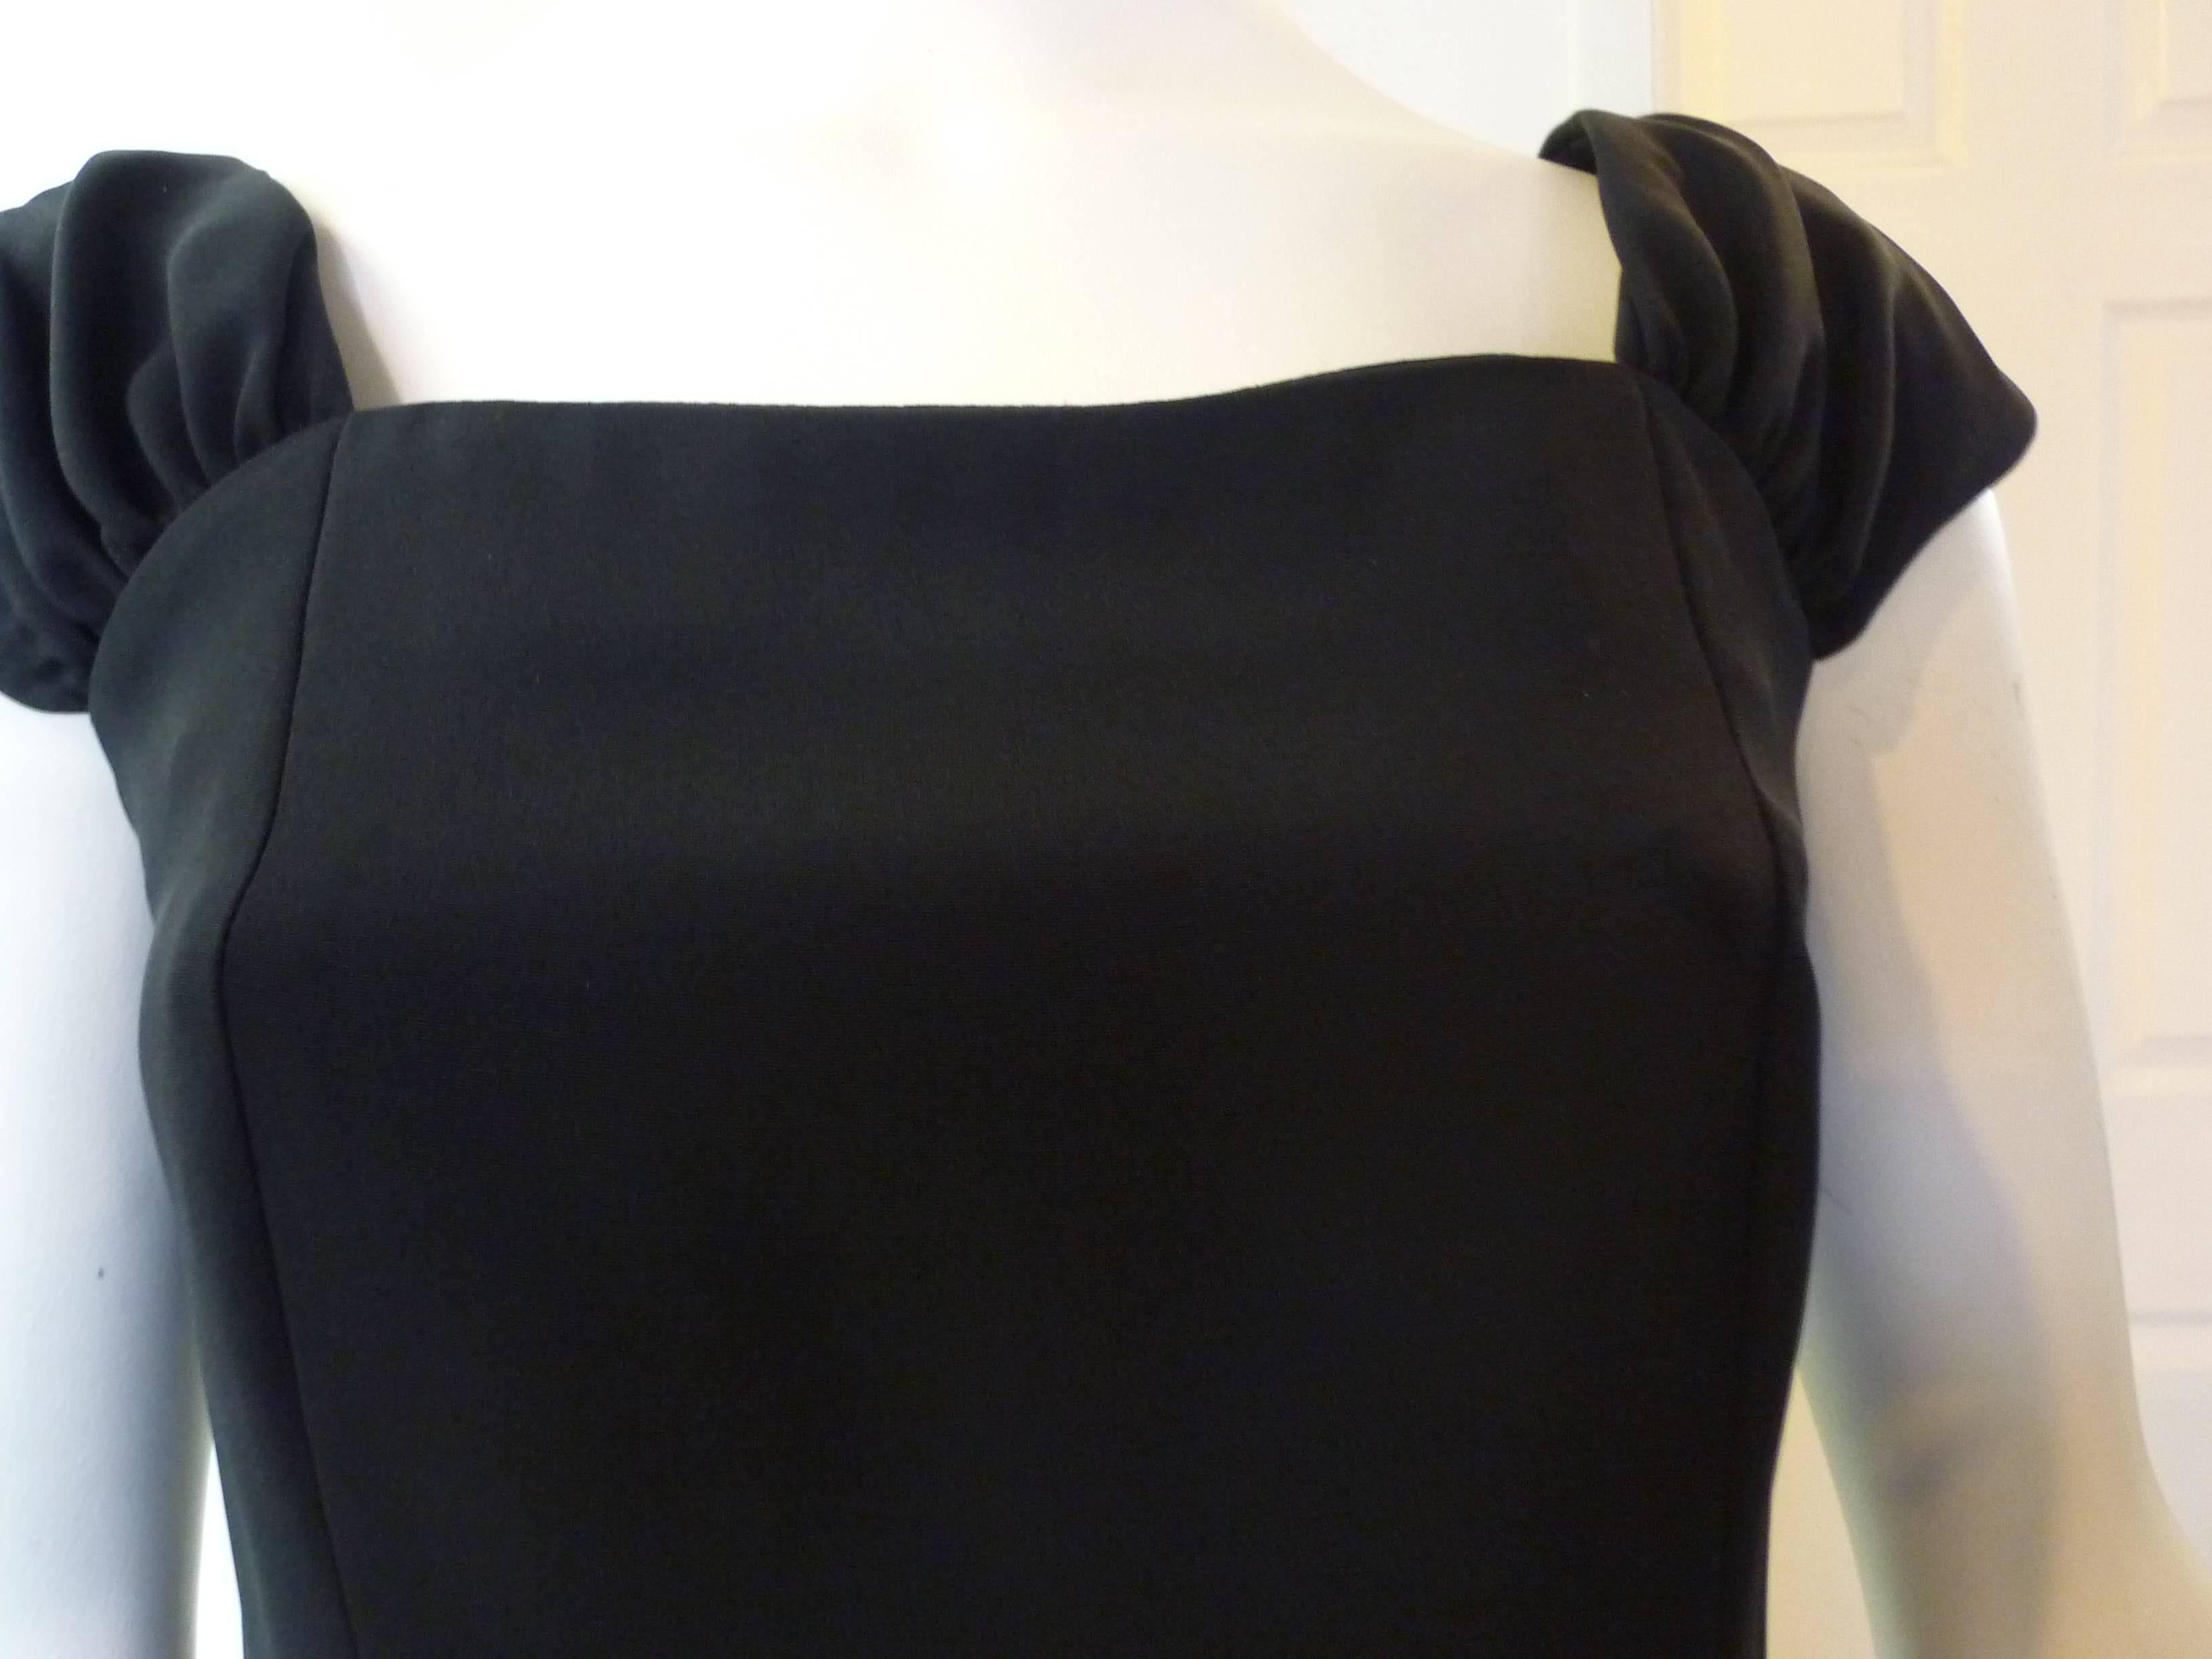 Very simple tailored dress made of a rayon blend, with nice wide draped shoulder straps and discreet neckline.